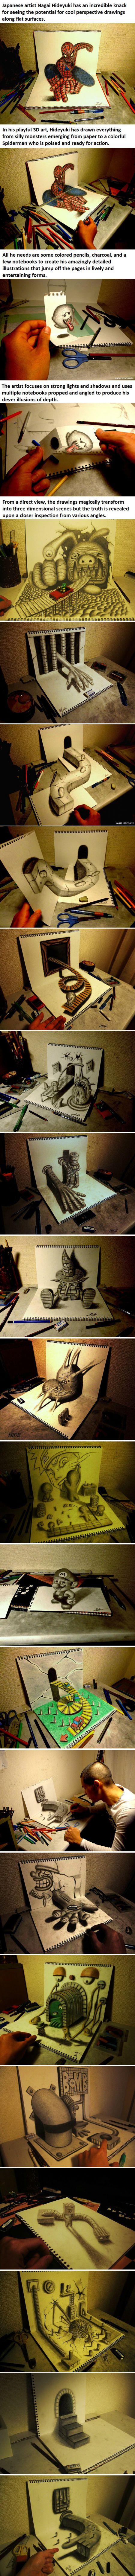 This Artist Only Uses Pencils And Notebooks. But What He Draws Is Incredible... -   Misc